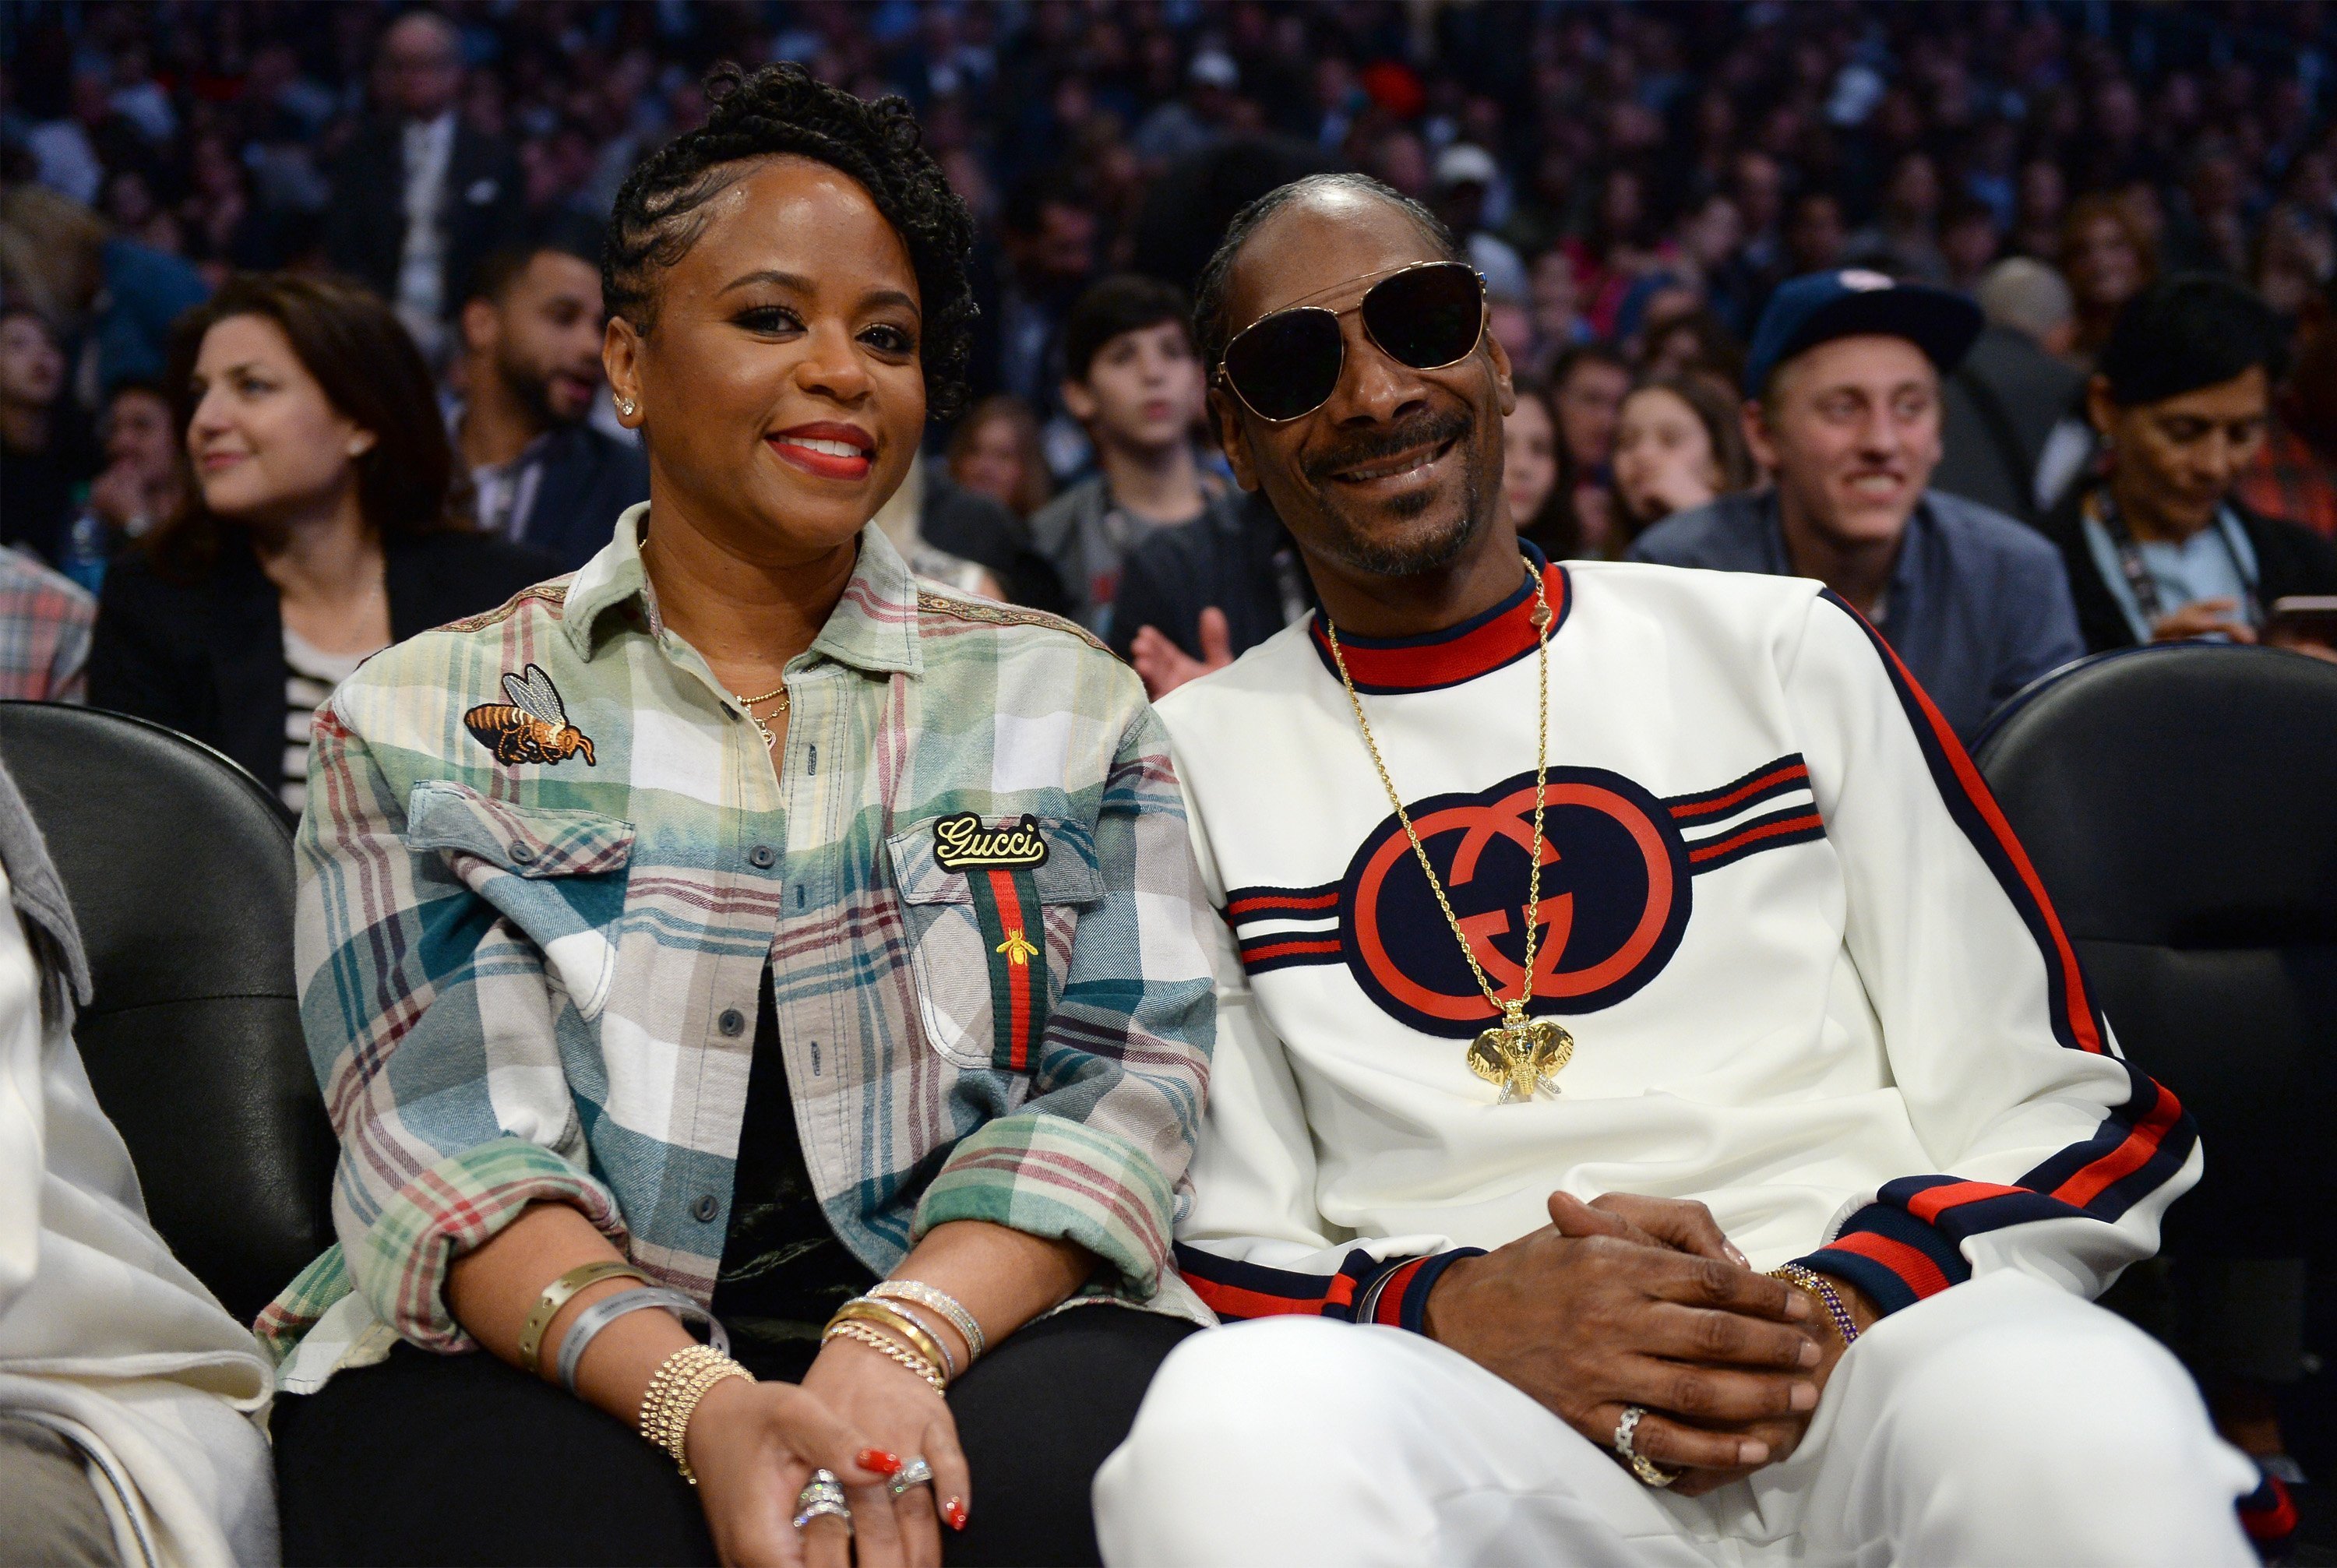 Snoop Dogg and wife Shante attend the NBA All-Star Game 2018 at Staples Center on February 18, 2018 | Photo: GettyImages